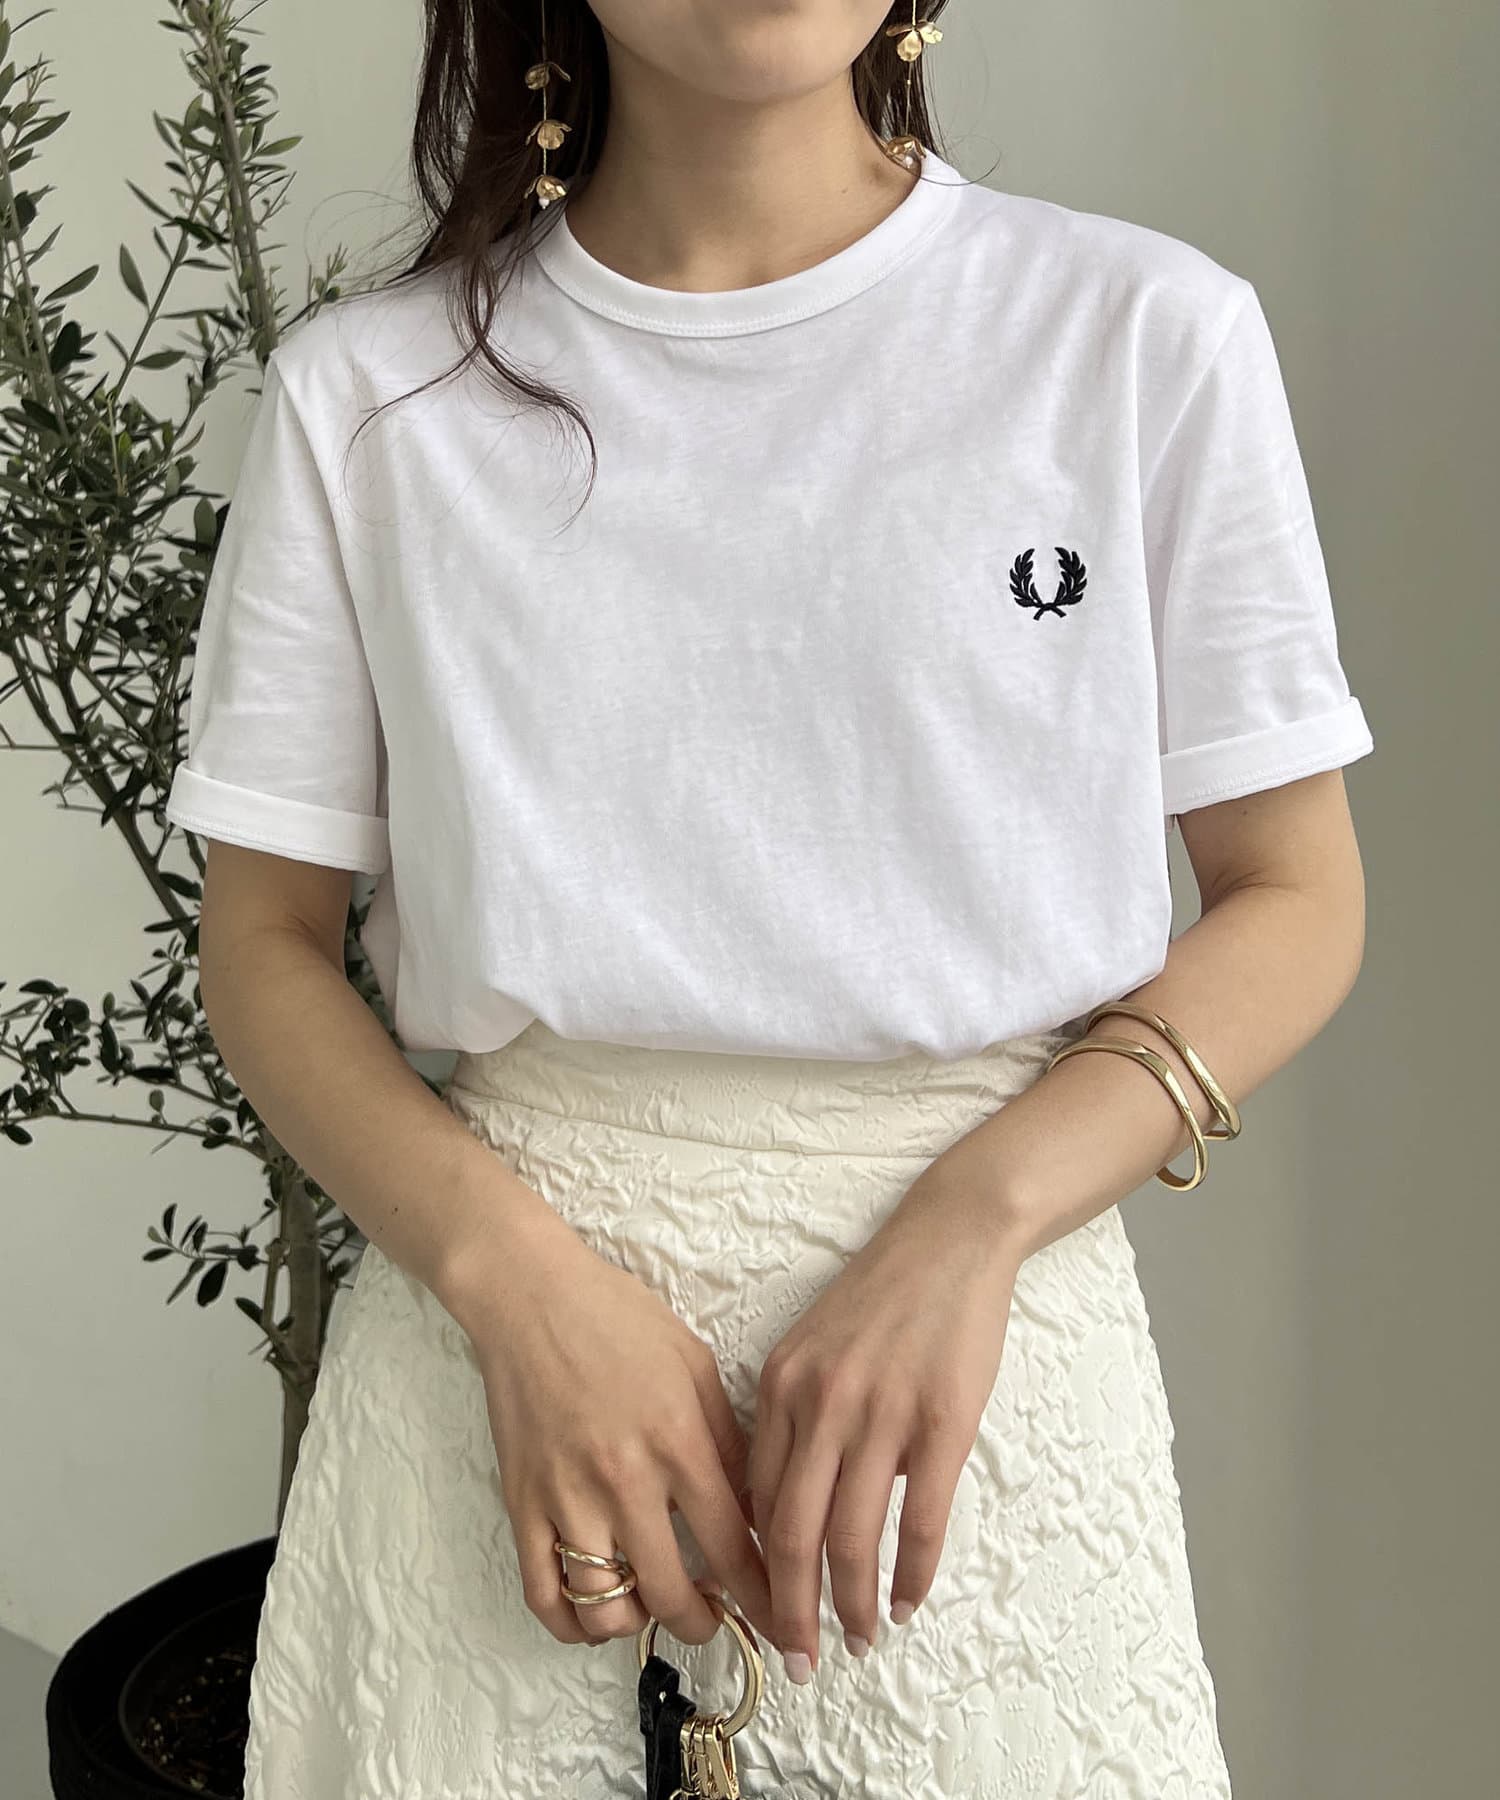 urbanresearchFRED PERRY capricieux lemage ワンポイントTシャツ